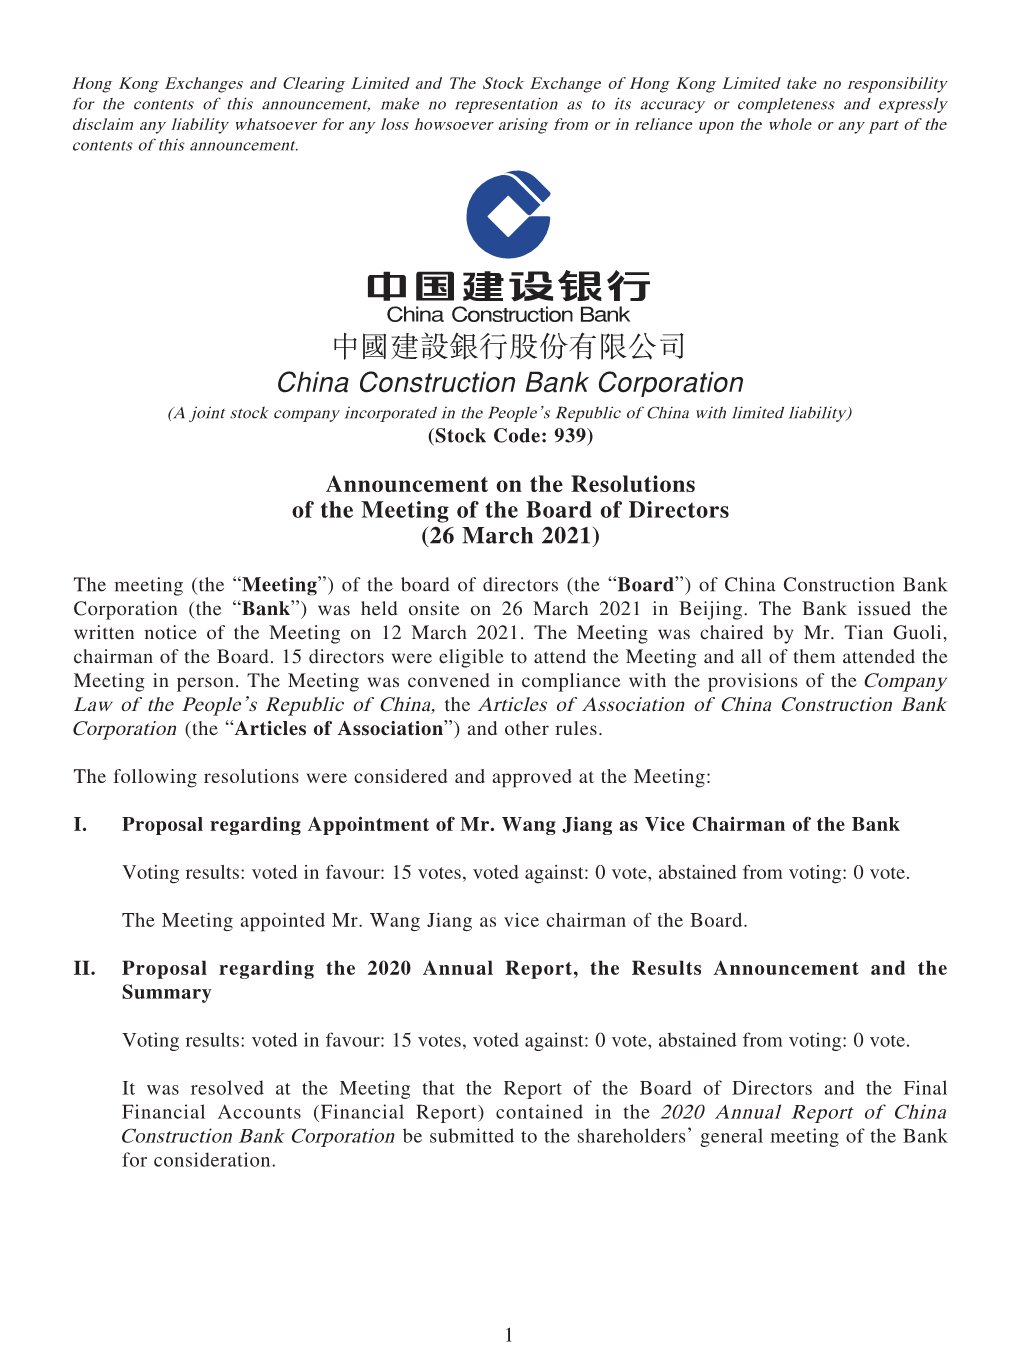 Announcement on the Resolutions of the Meeting of the Board of Directors (26 March 2021)